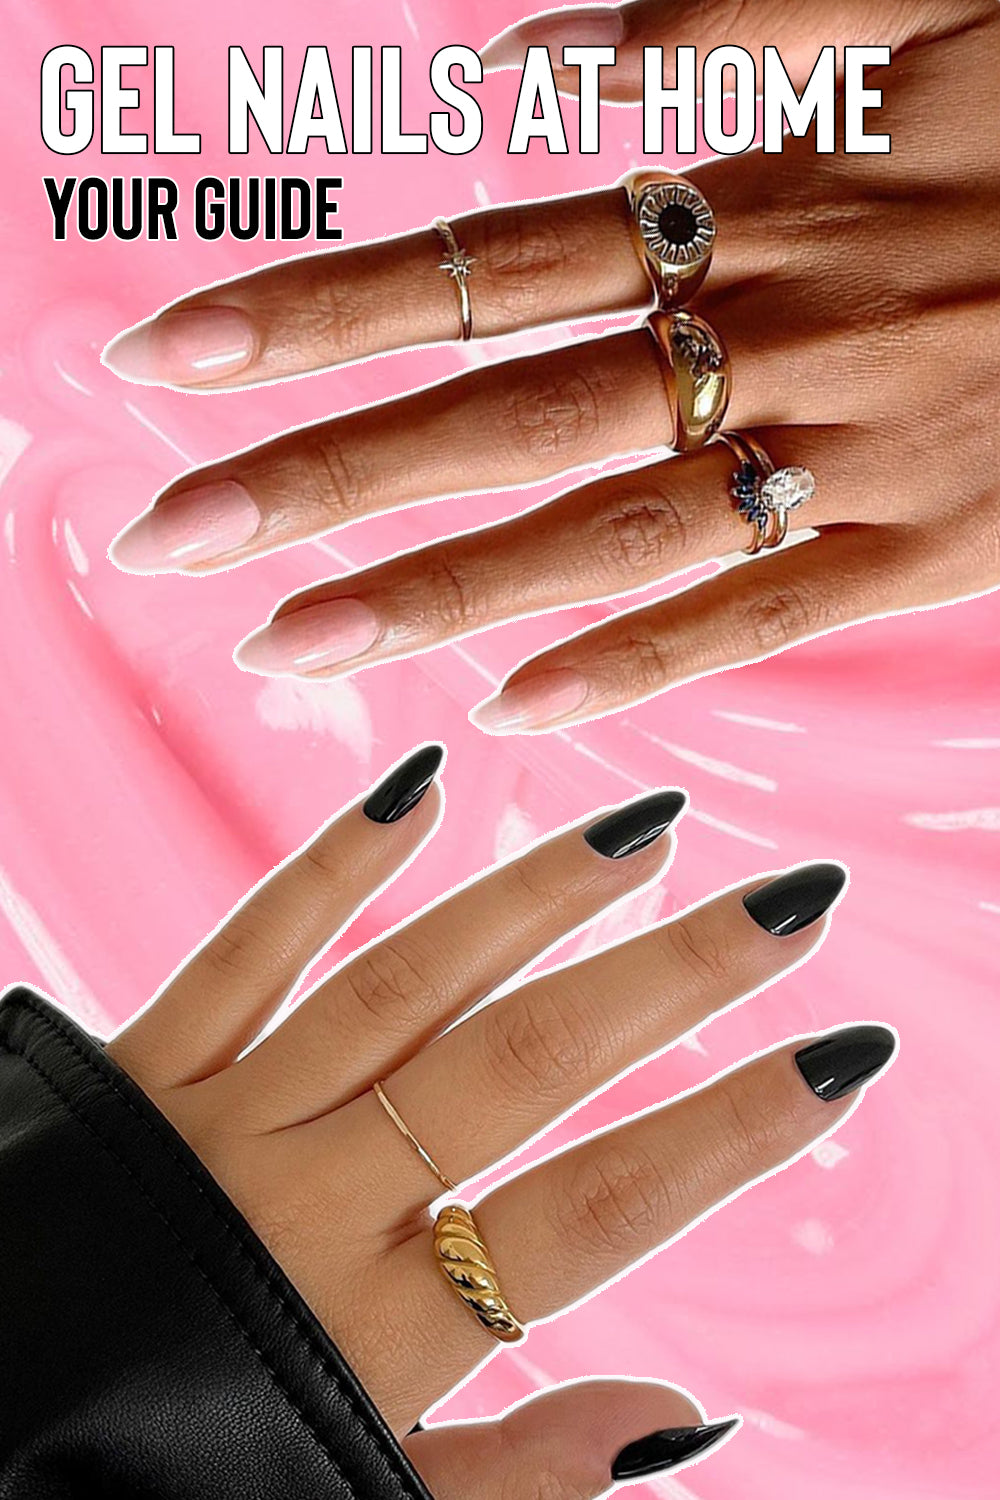 Glamnetic press-on nails review: Did they nail it?